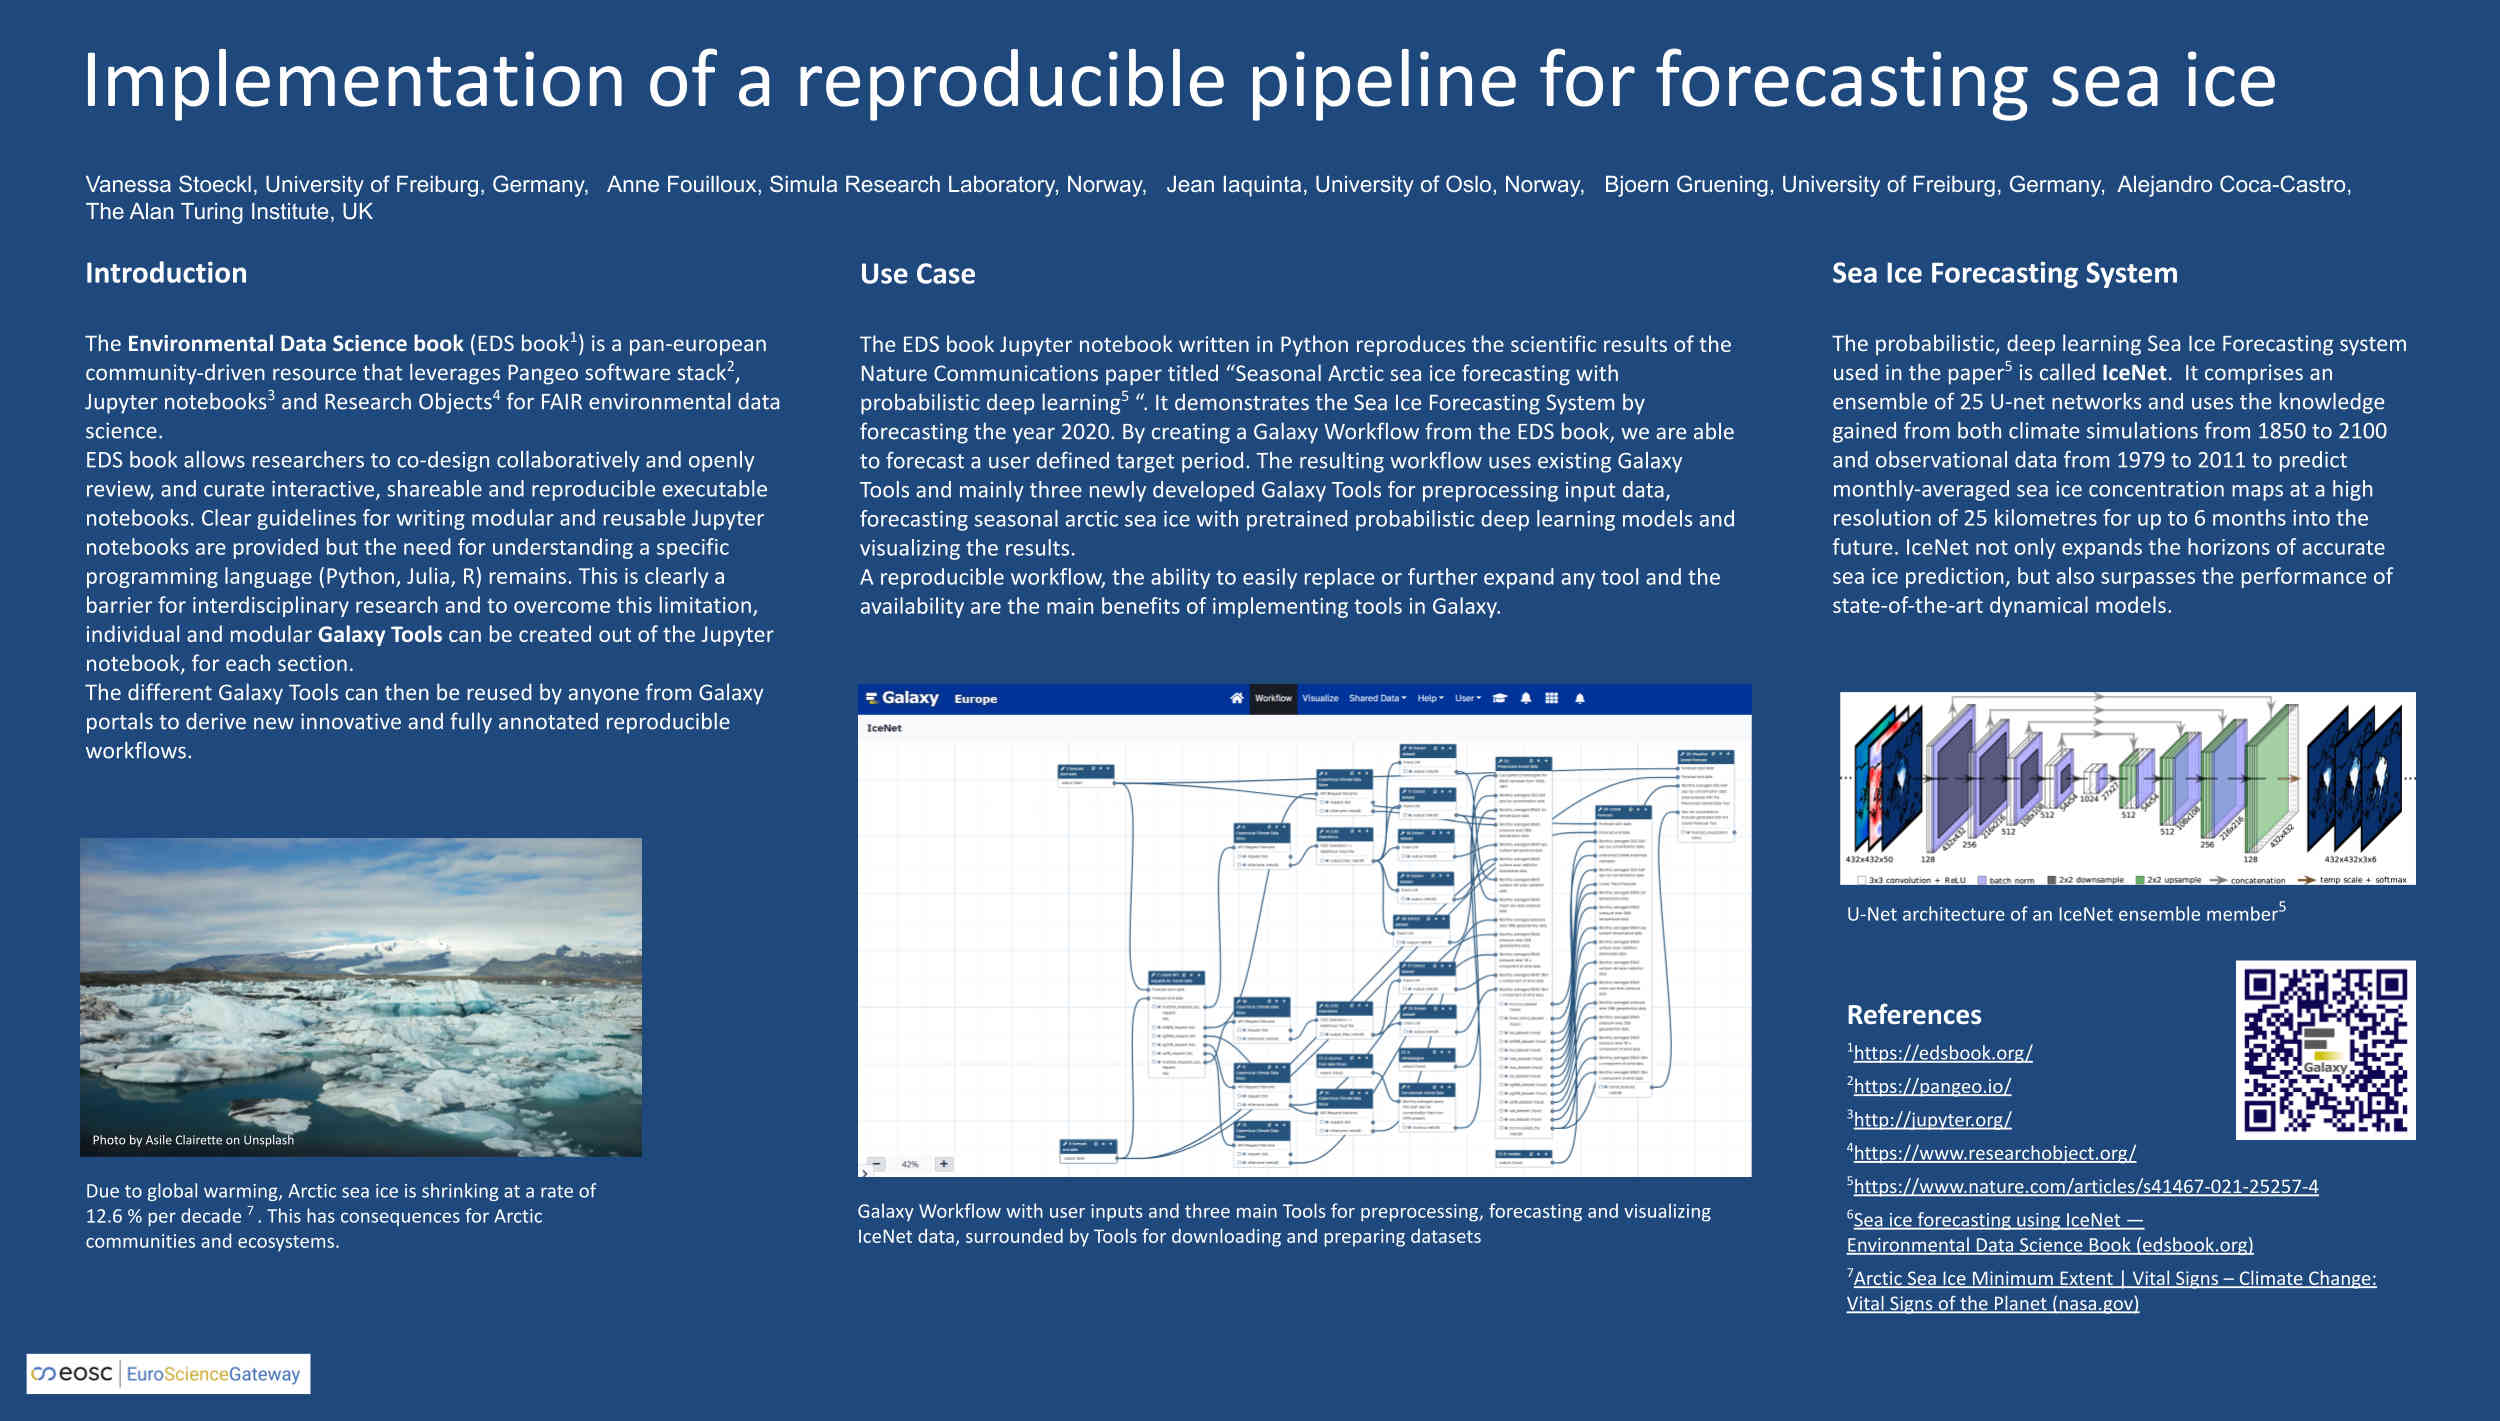 Implementation of a reproducible pipeline for producing seasonal Arctic sea ice forecasts in Galaxy